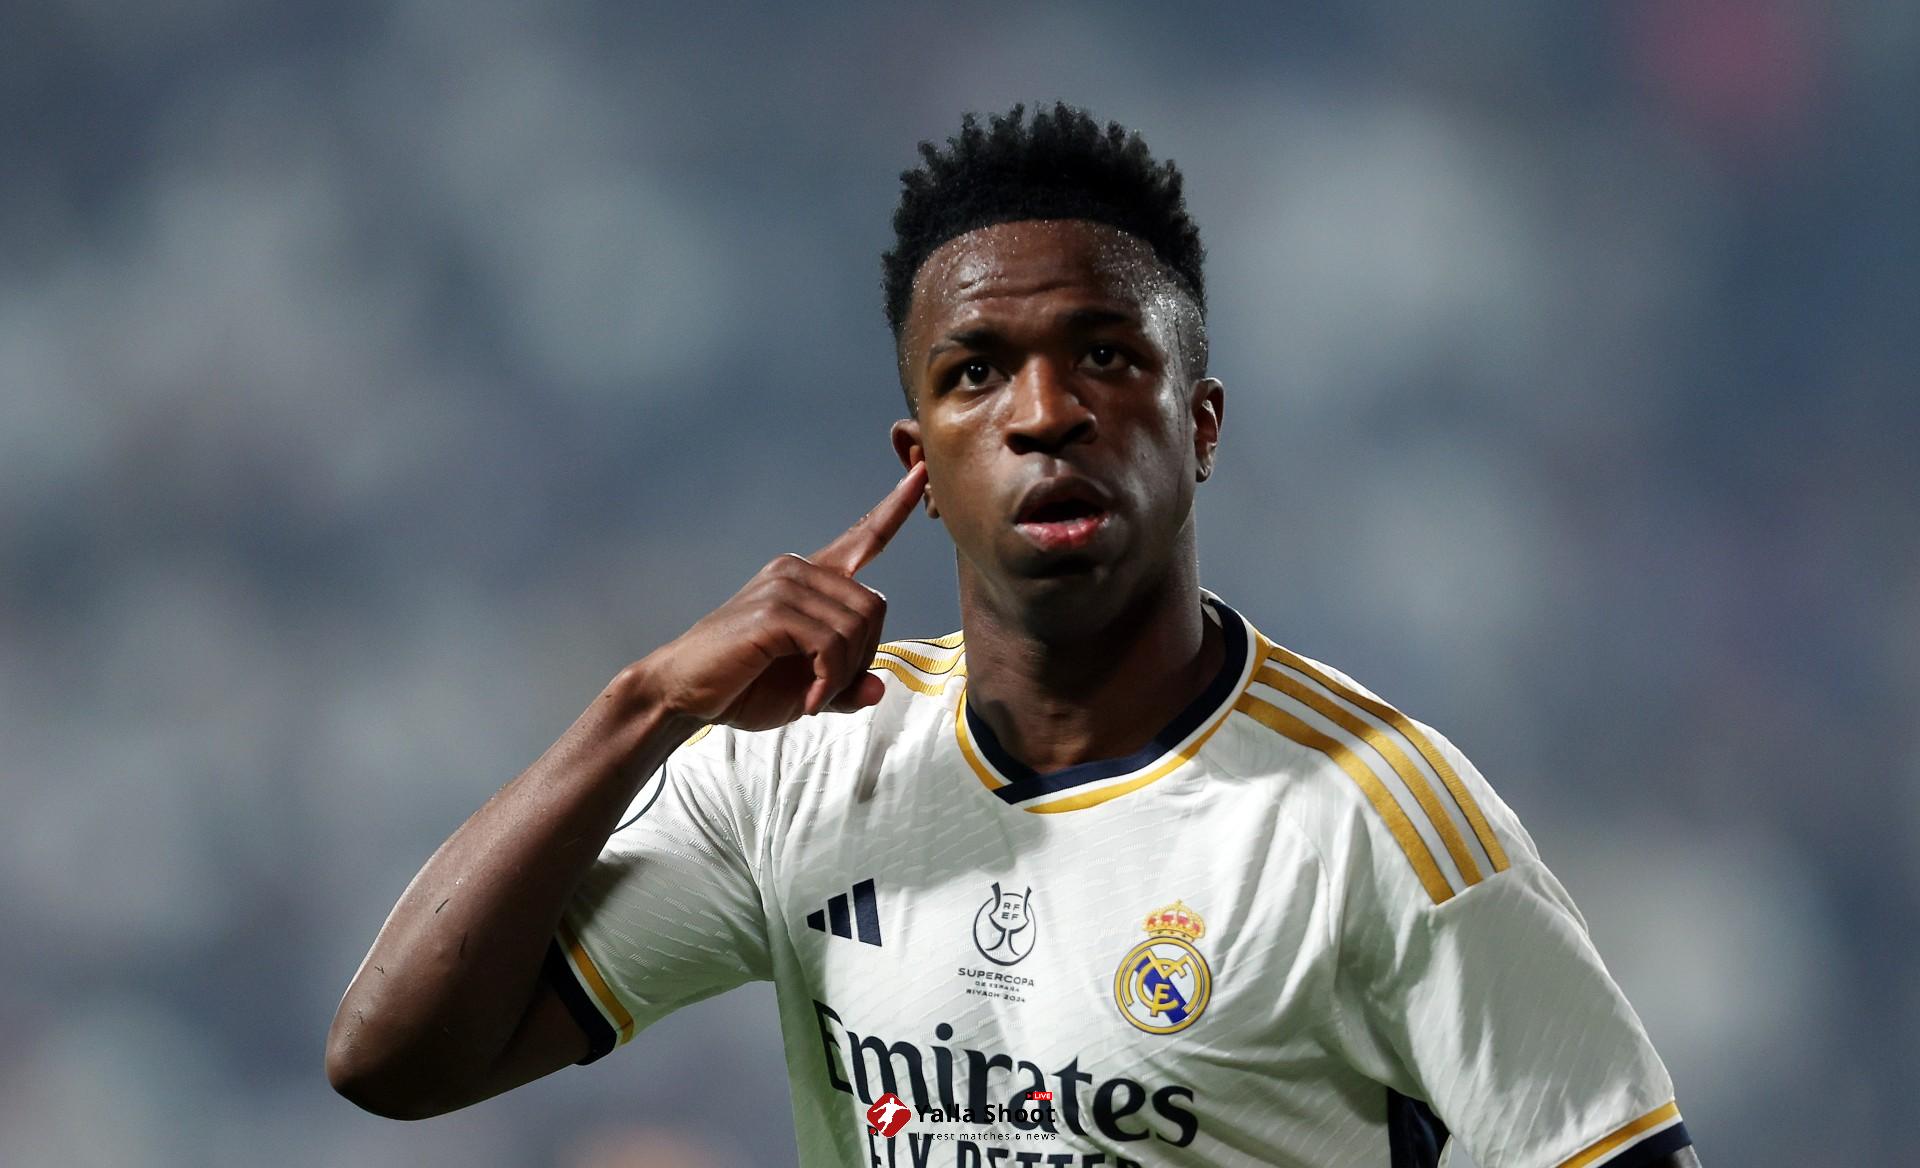 Report claims Manchester United are willing to pay €150m to sign Real Madrid star Vinicius Junior